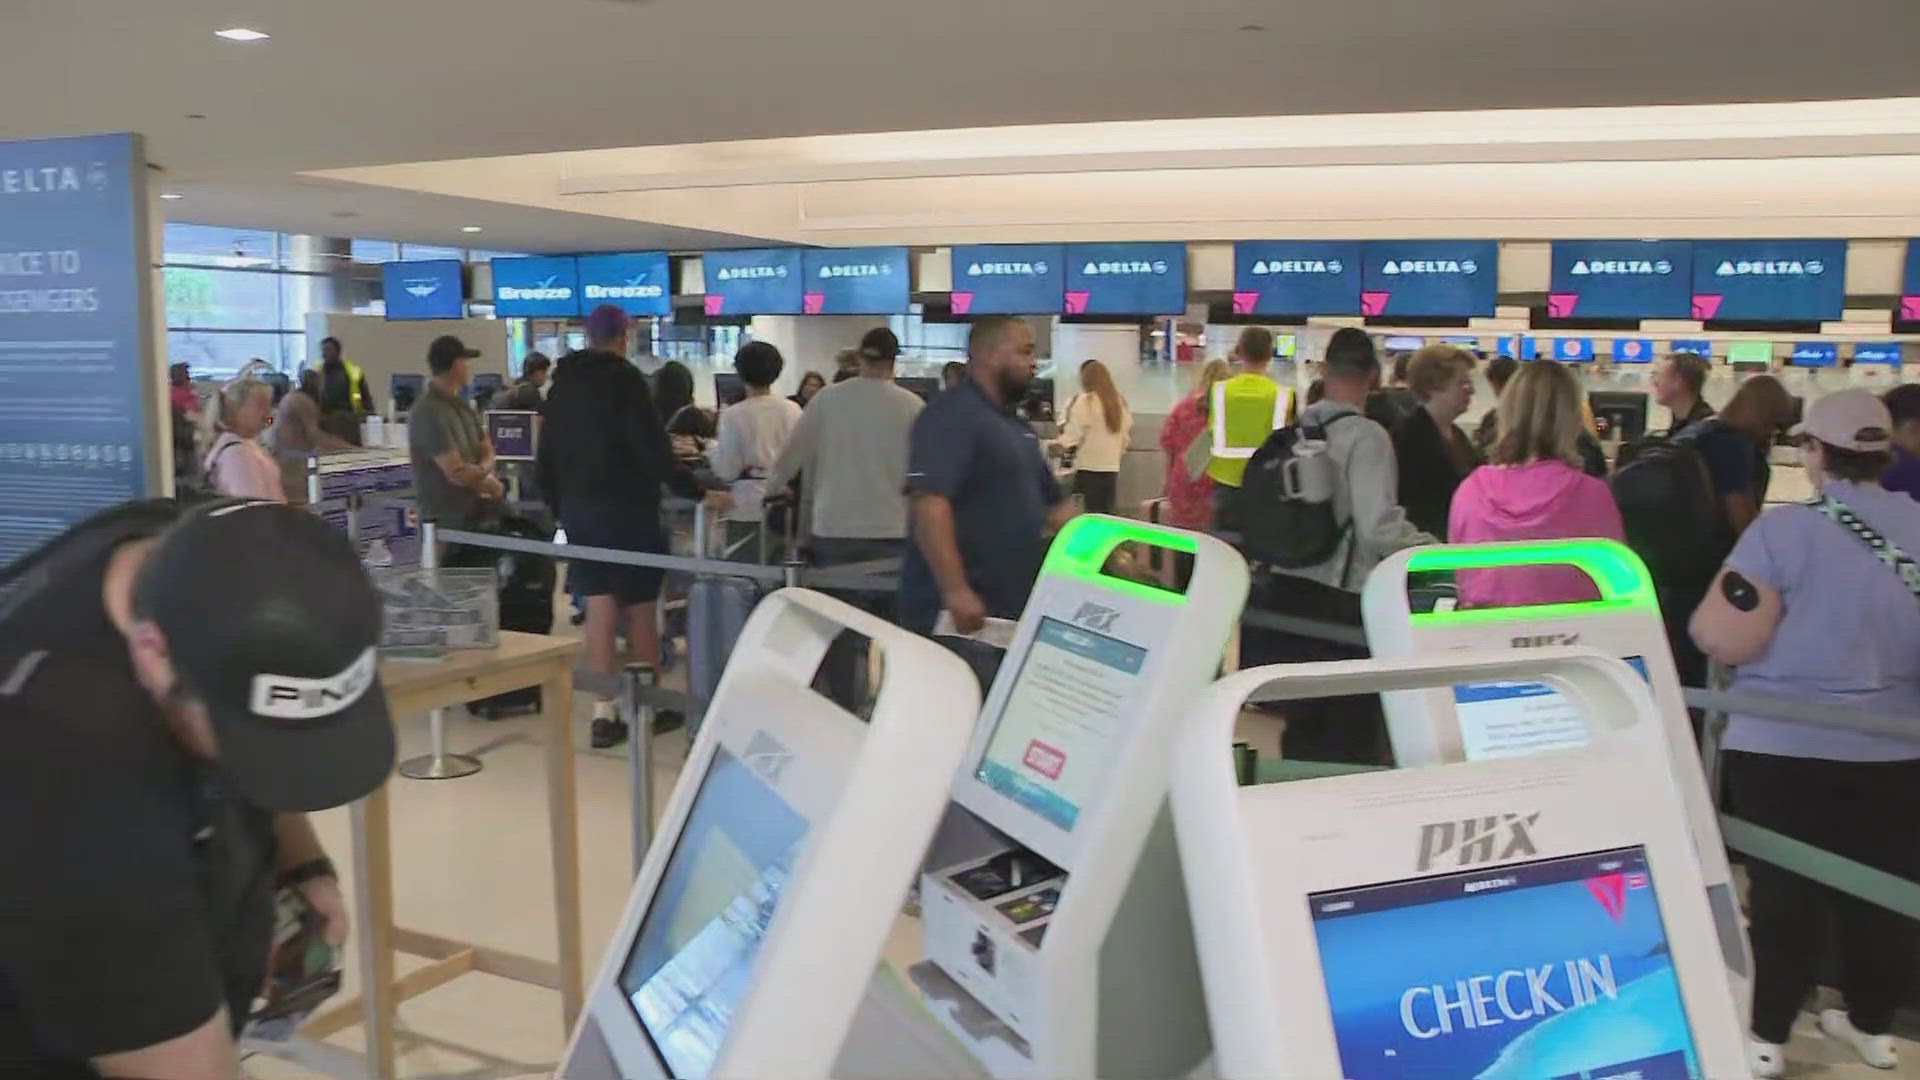 An internet issue at Sky Harbor airport is causing issues for travelers looking to check-in. Here's what we know so far.